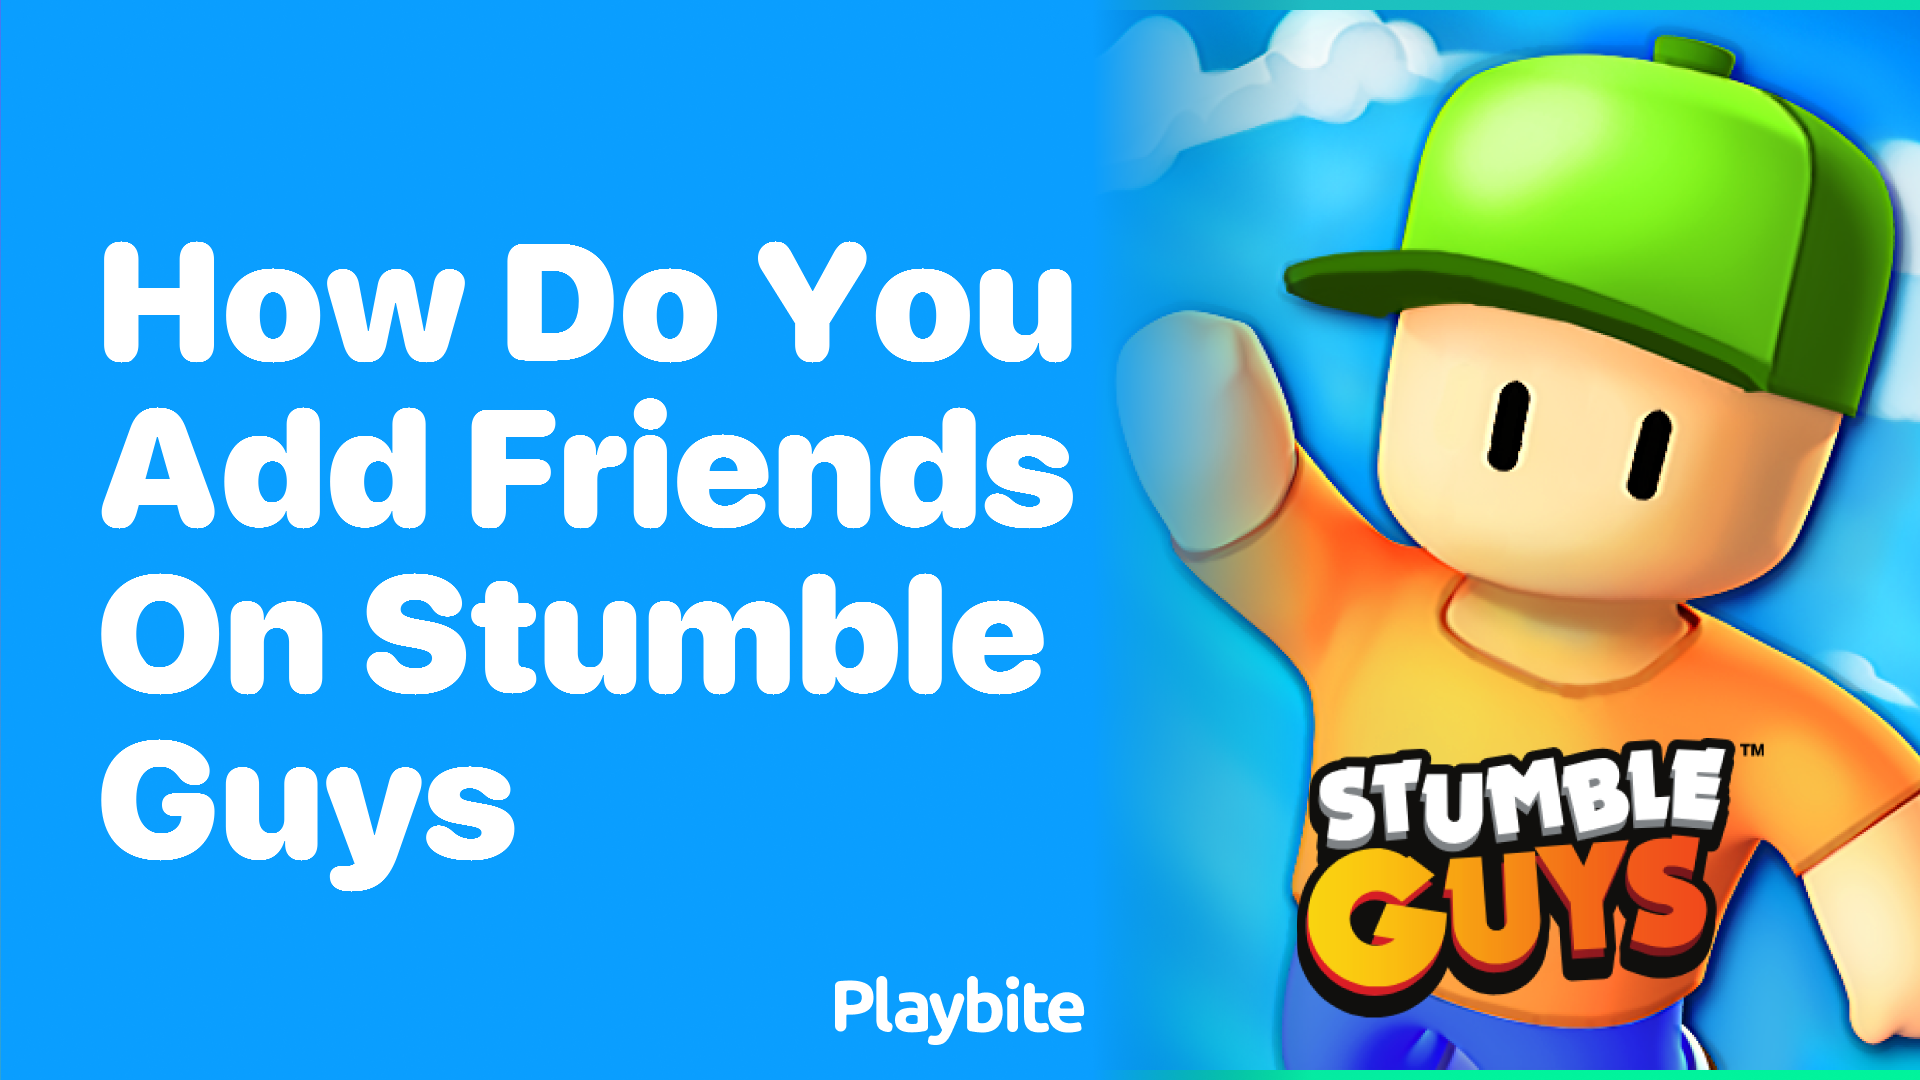 How Do You Add Friends on Stumble Guys?